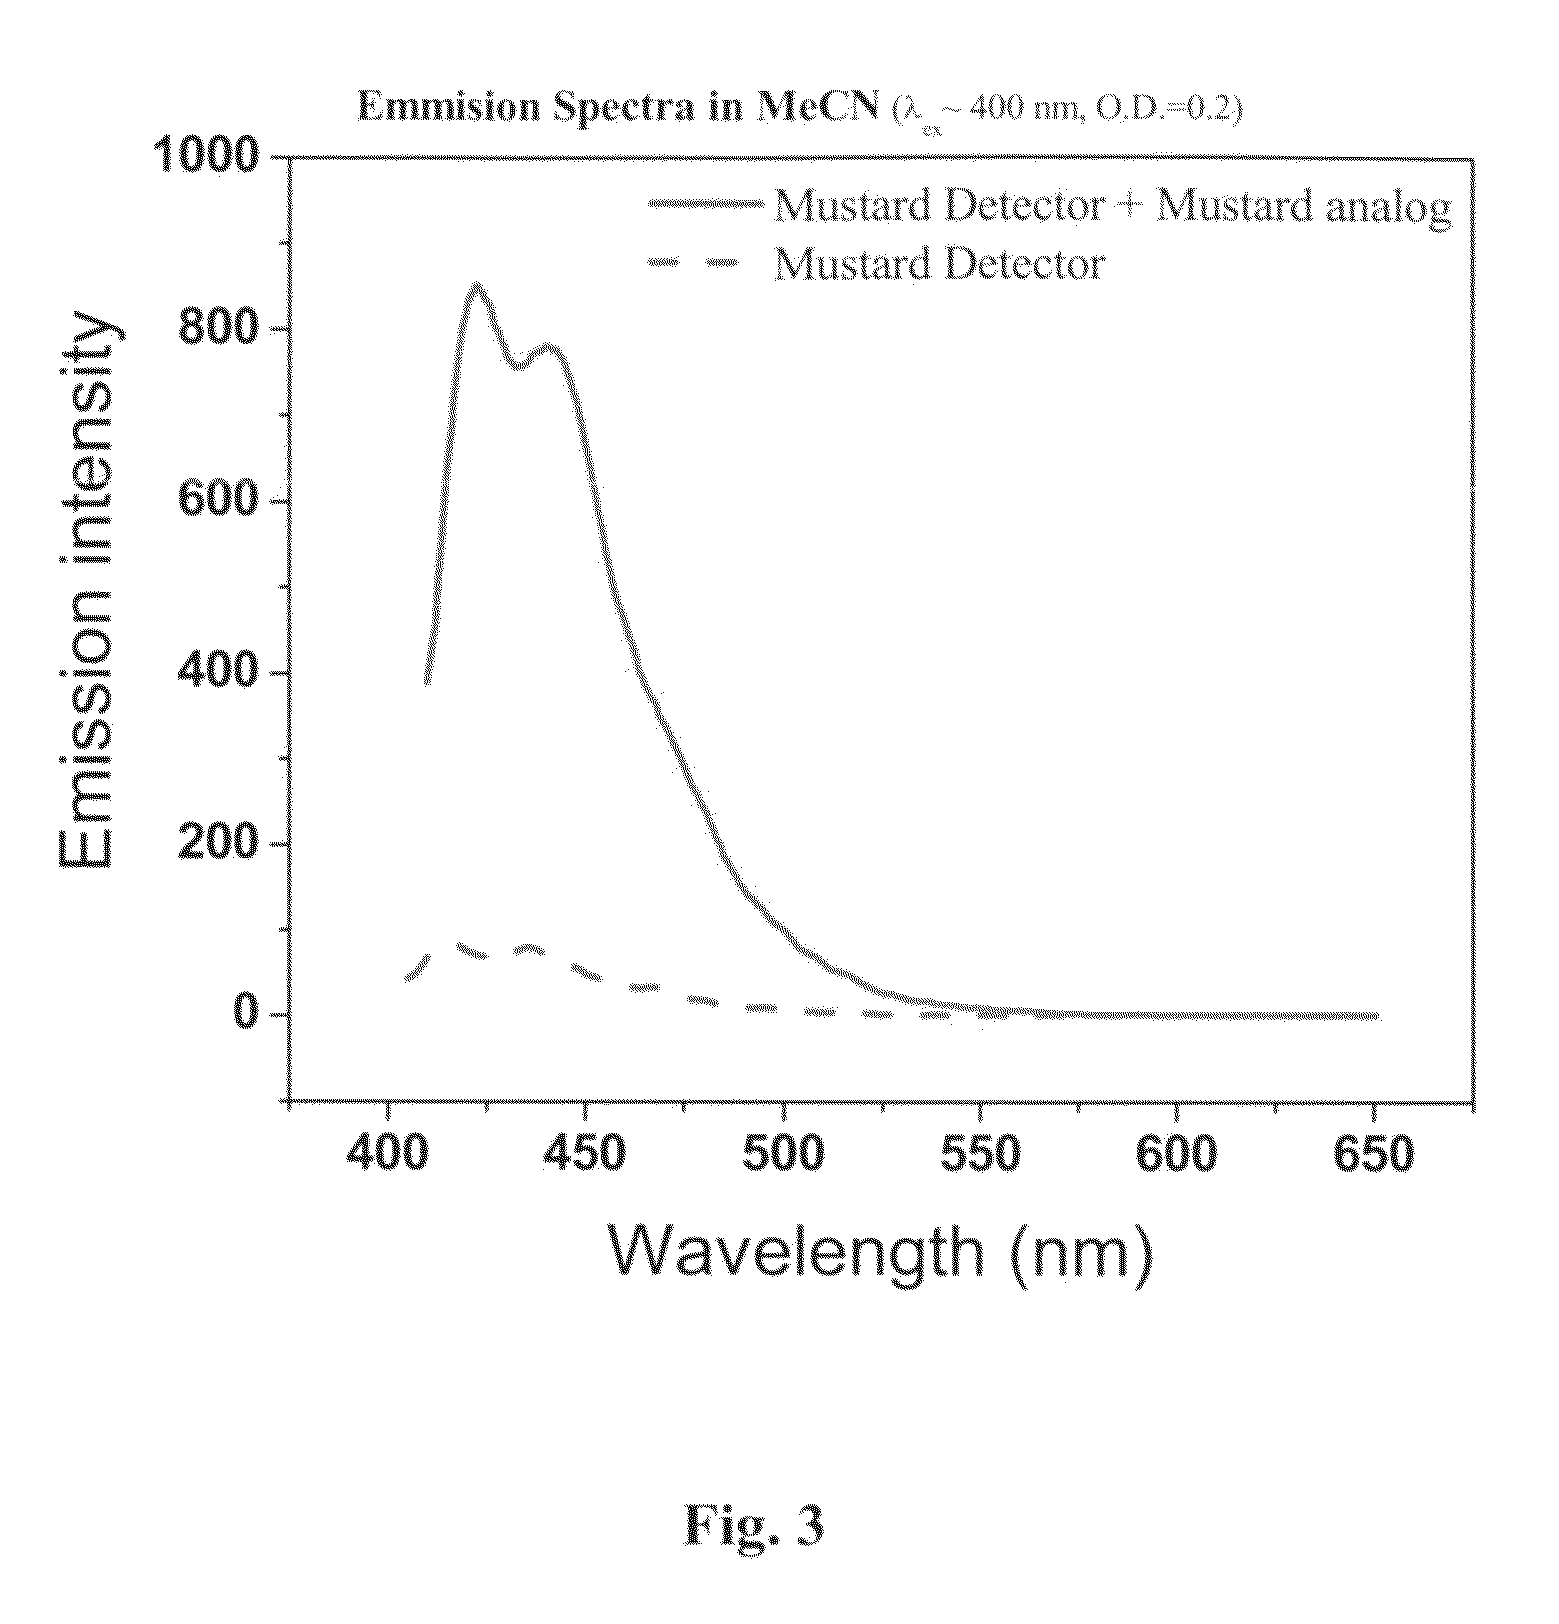 Method for identifying electrophiles and nucleophiles in a sample